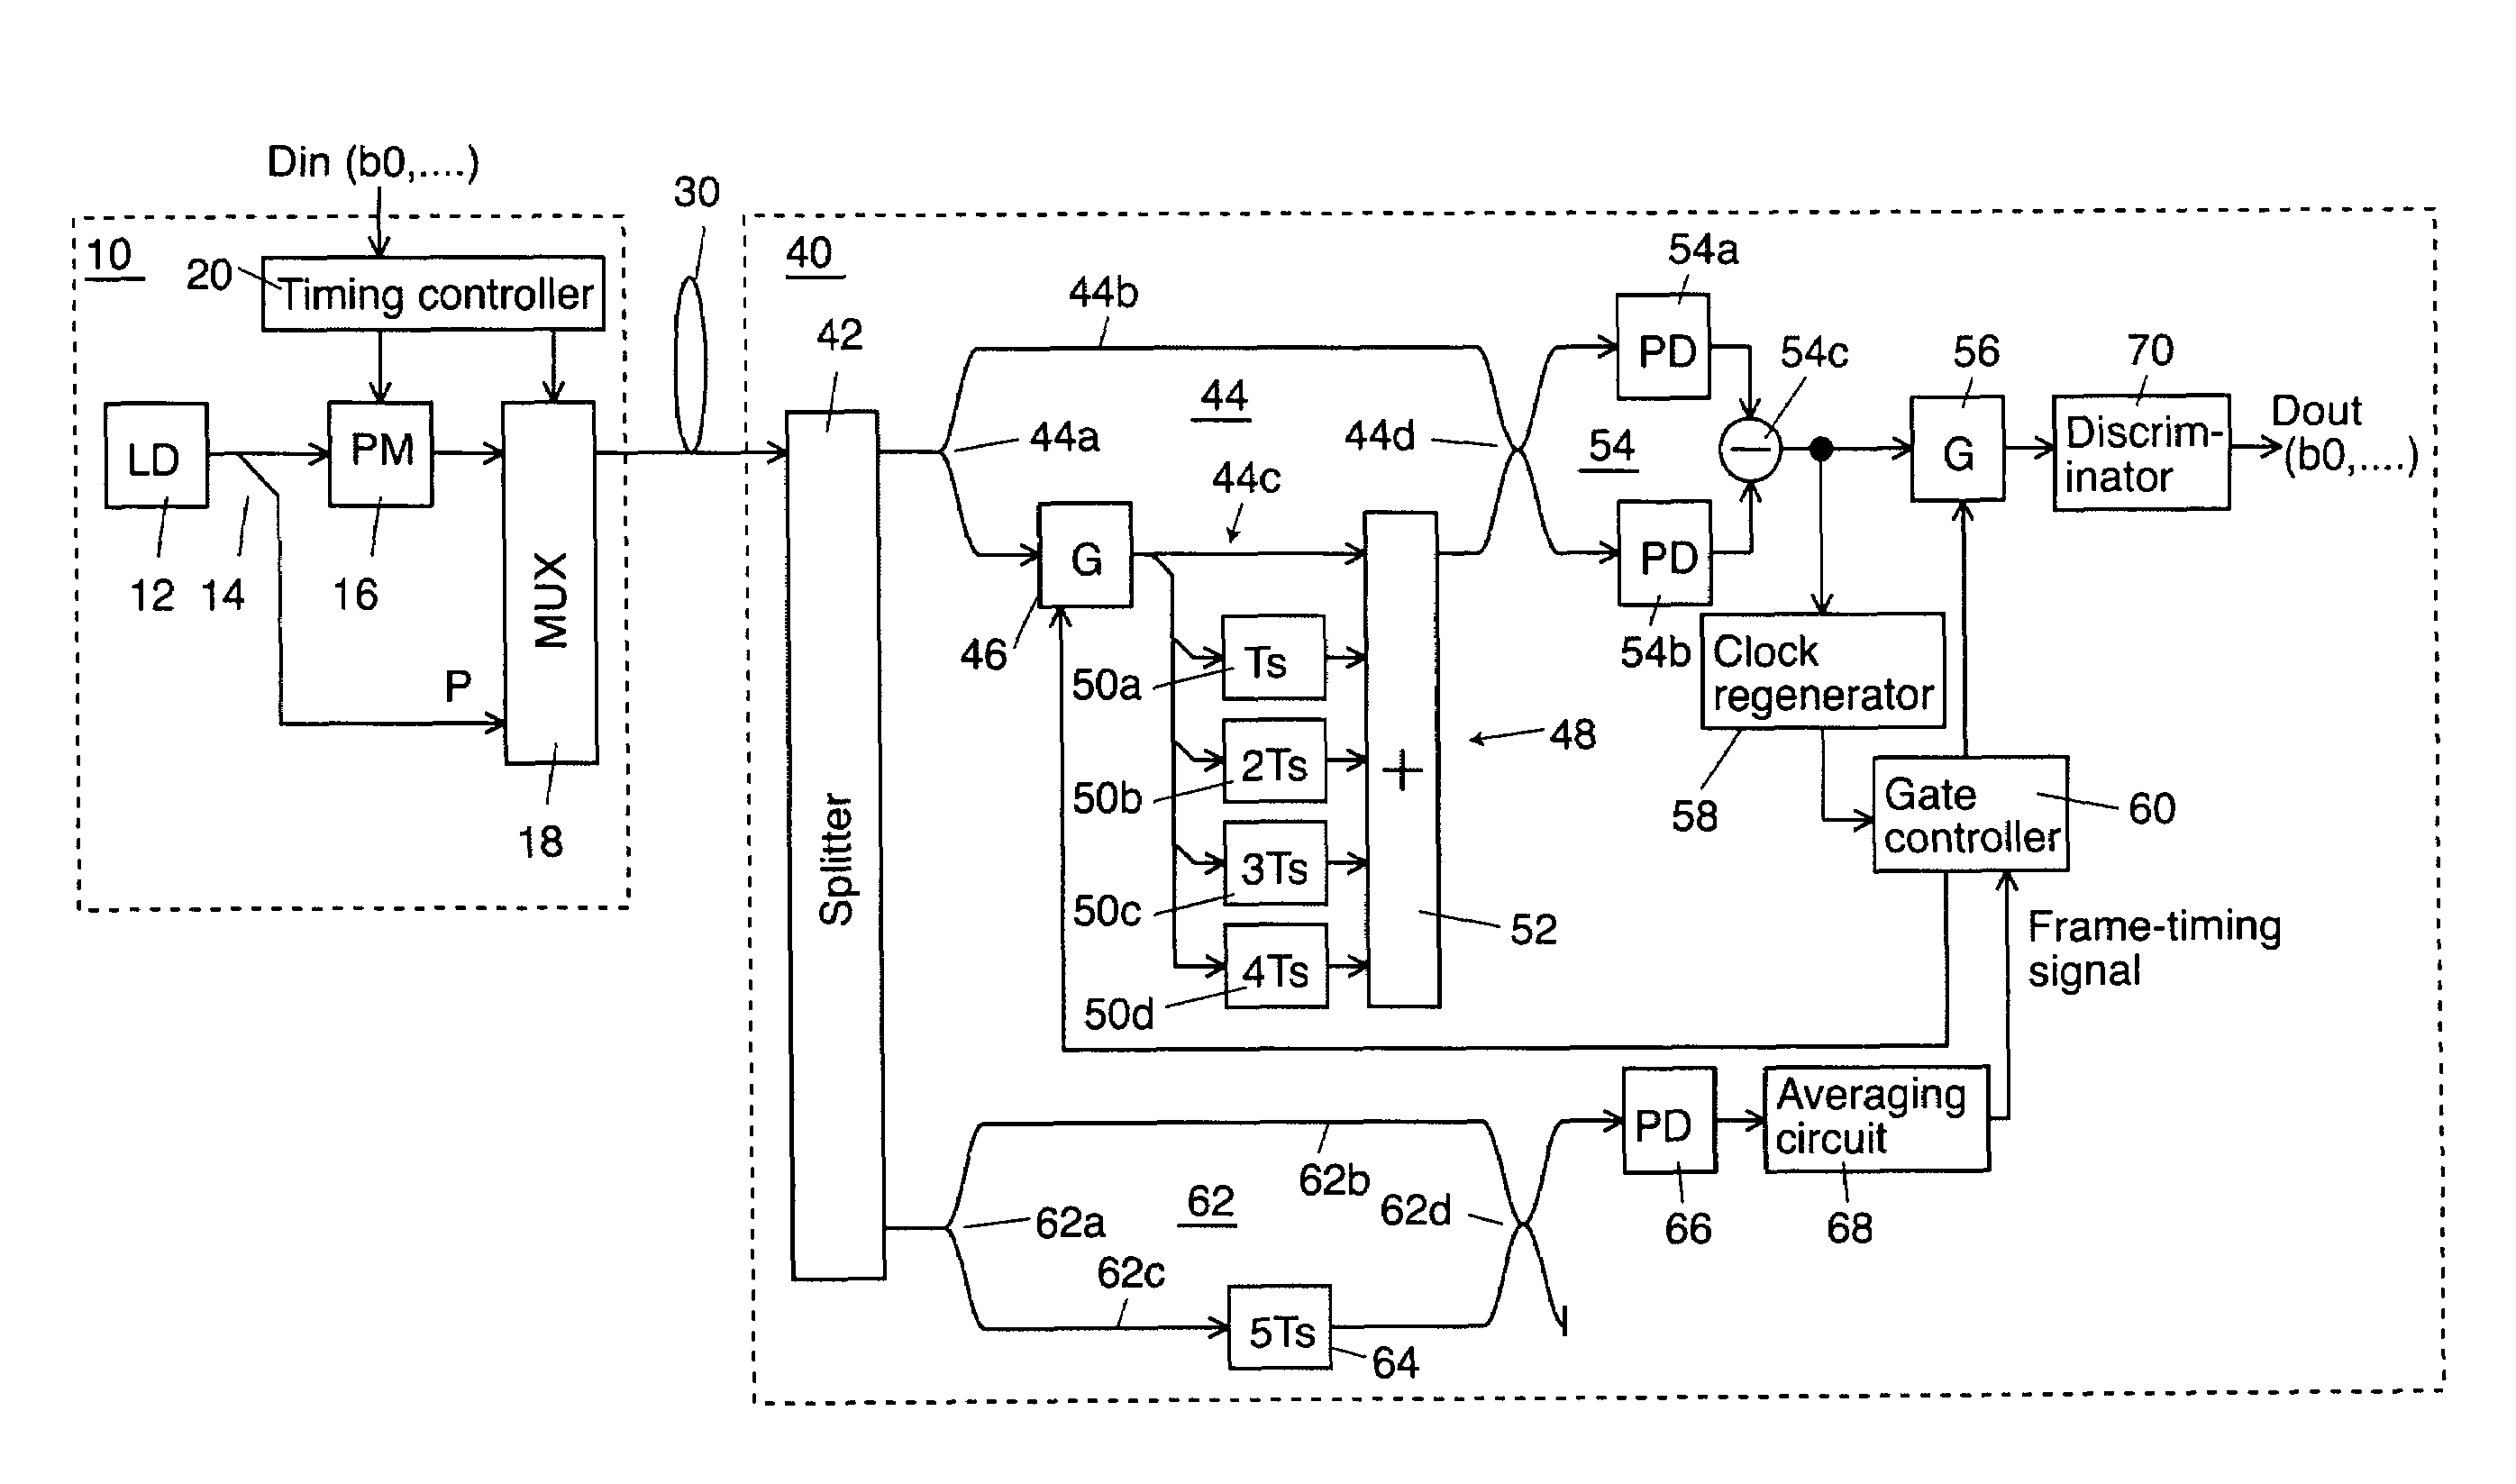 Method and apparatus for receiving data